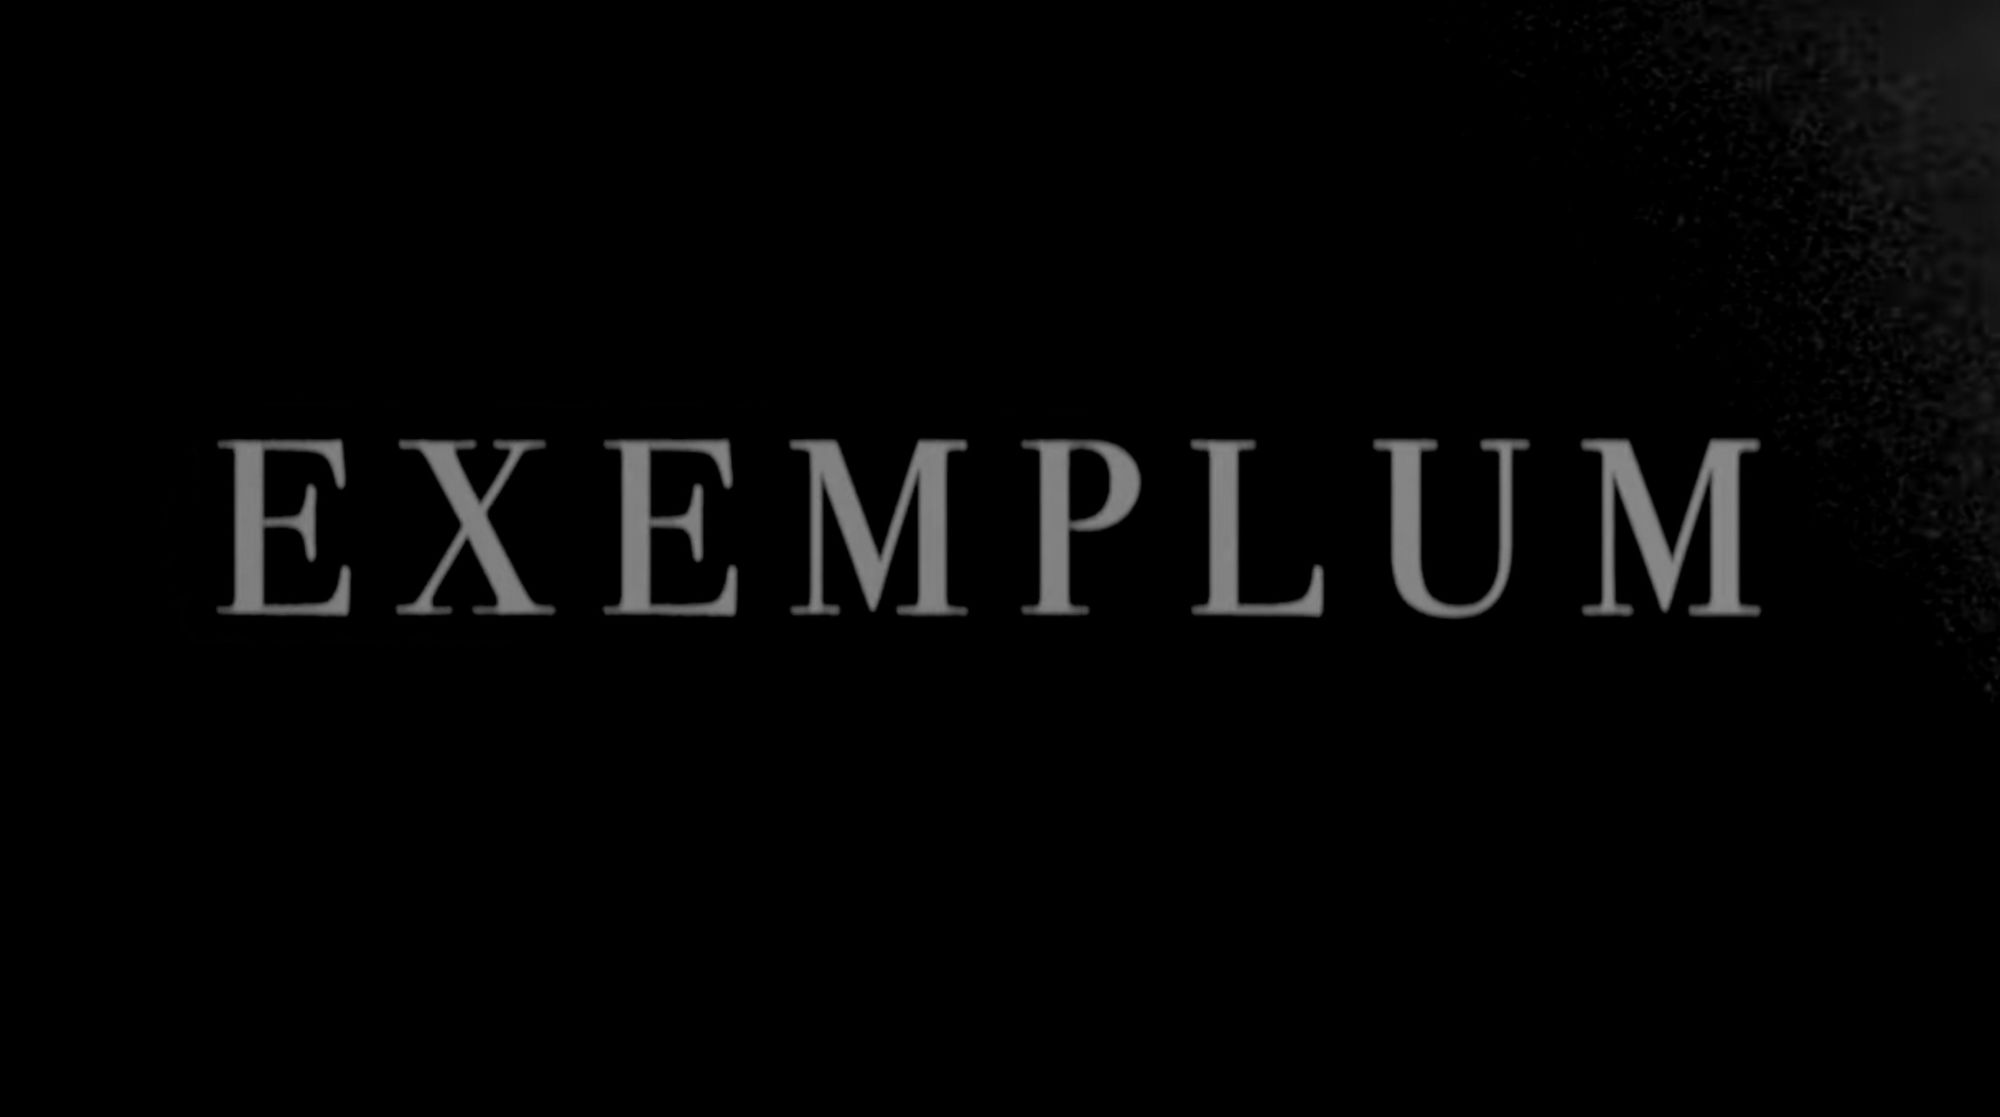 'Exemplum' Director Paul Roland Discusses How To Make Independent Film On 'Pop Culture Crisis'